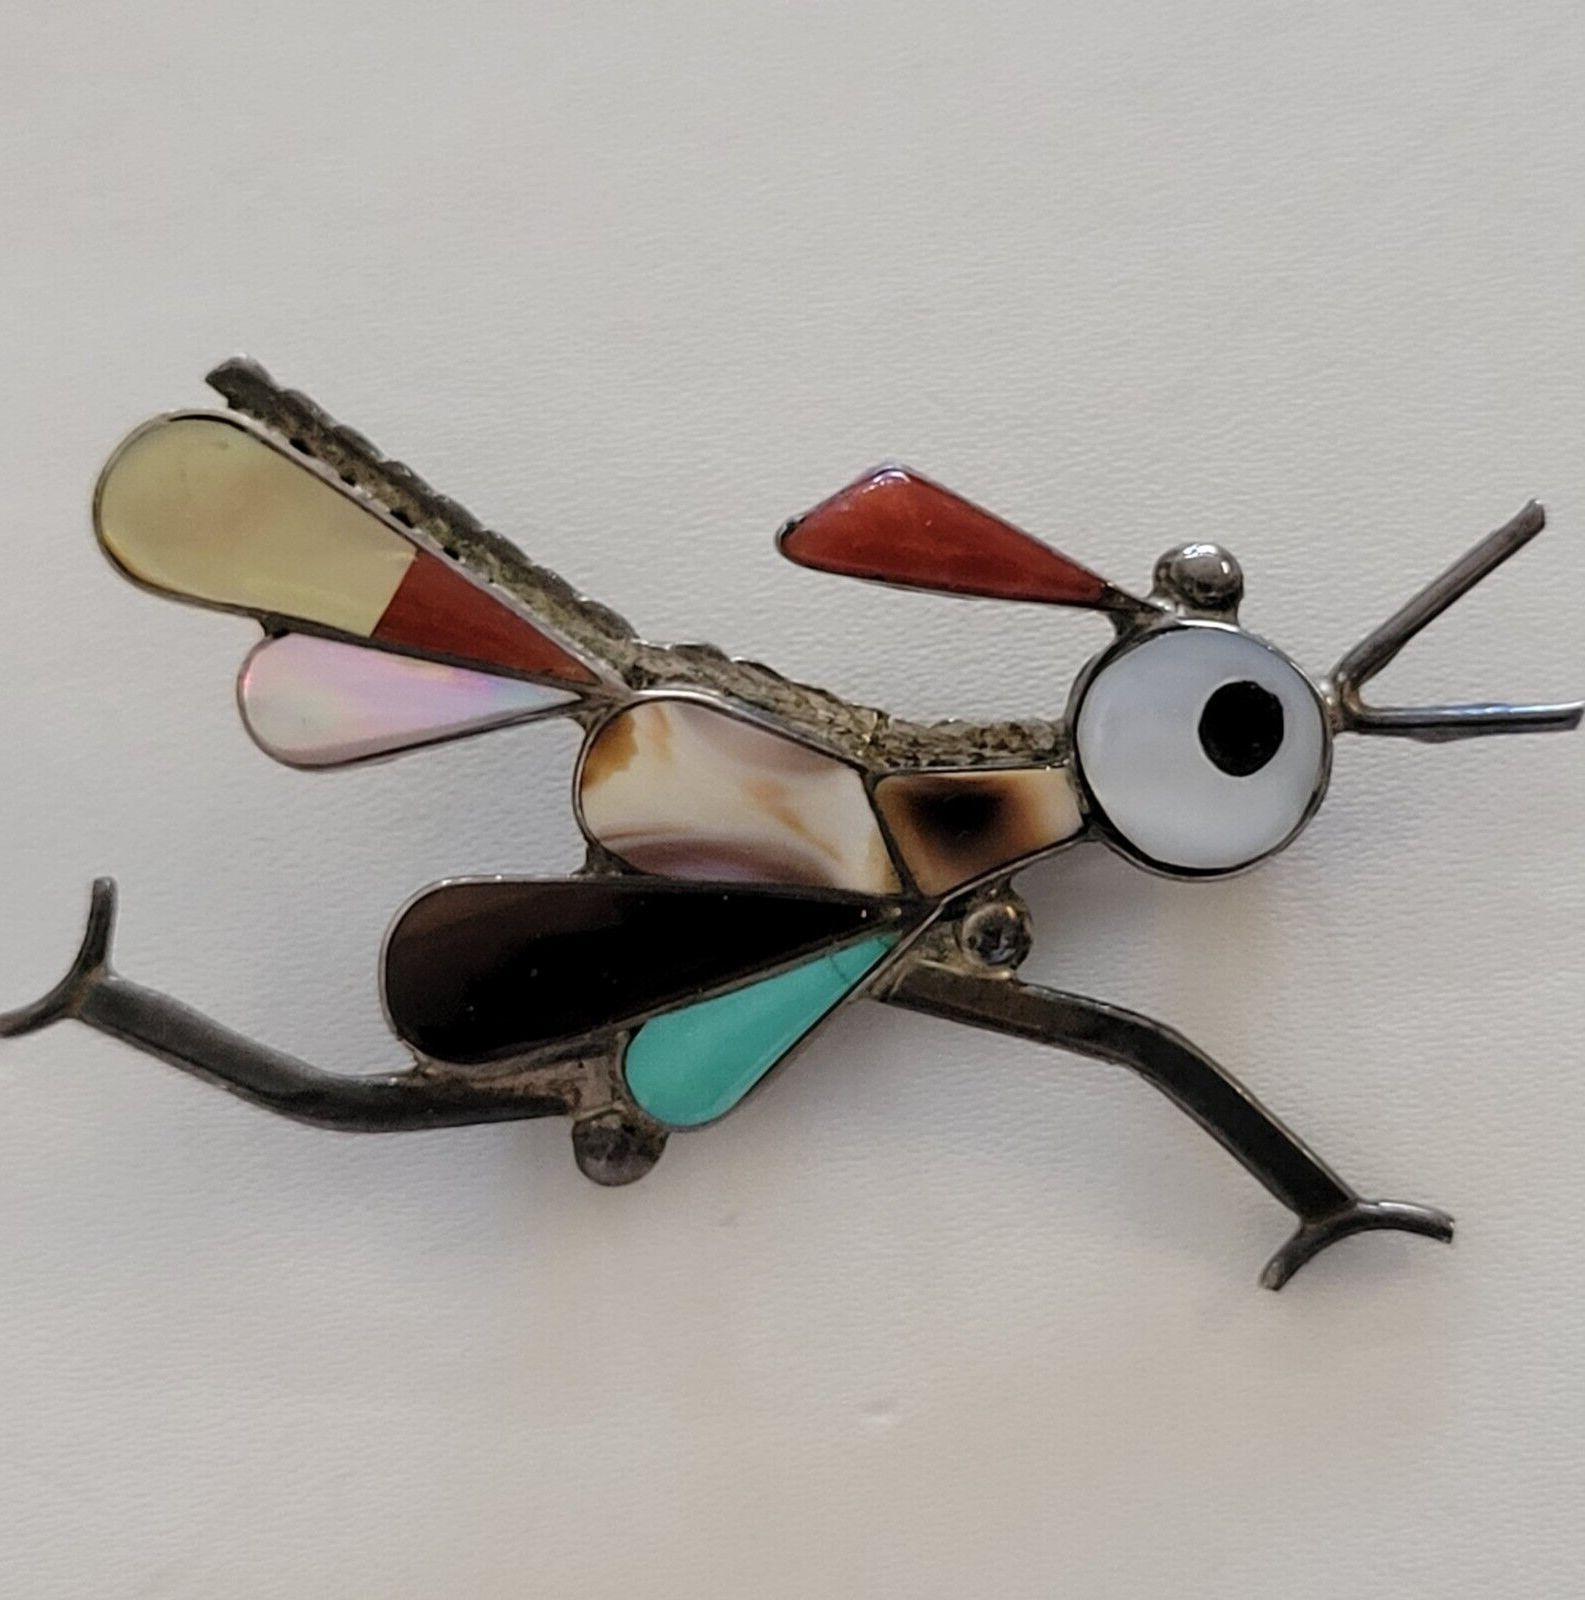 Simply Delightful! Vintage Mid Century Modern ZUNI Roadrunner Turquoise and Sterling Silver Pendant Brooch Pin. Hand crafted in Sterling Silver and Hand set with Turquoise and assorted Stones. Measuring approx. 2.” tall and wide. More Wonderful in